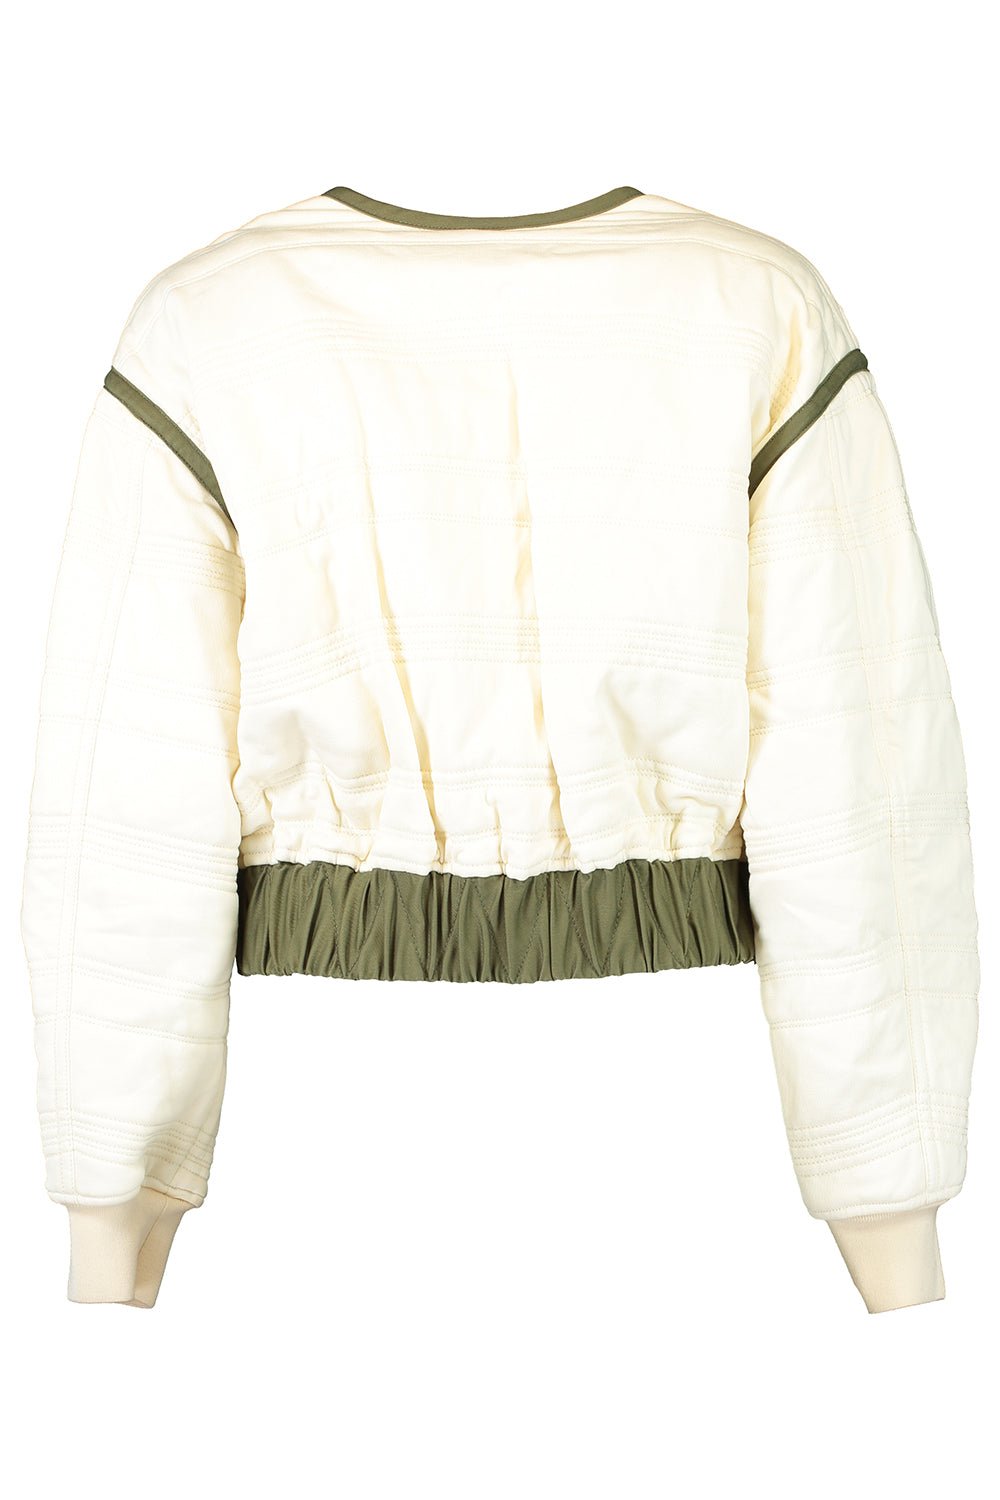 3.1 PHILLIP LIM-Quilted Utility Jacket-IVORY